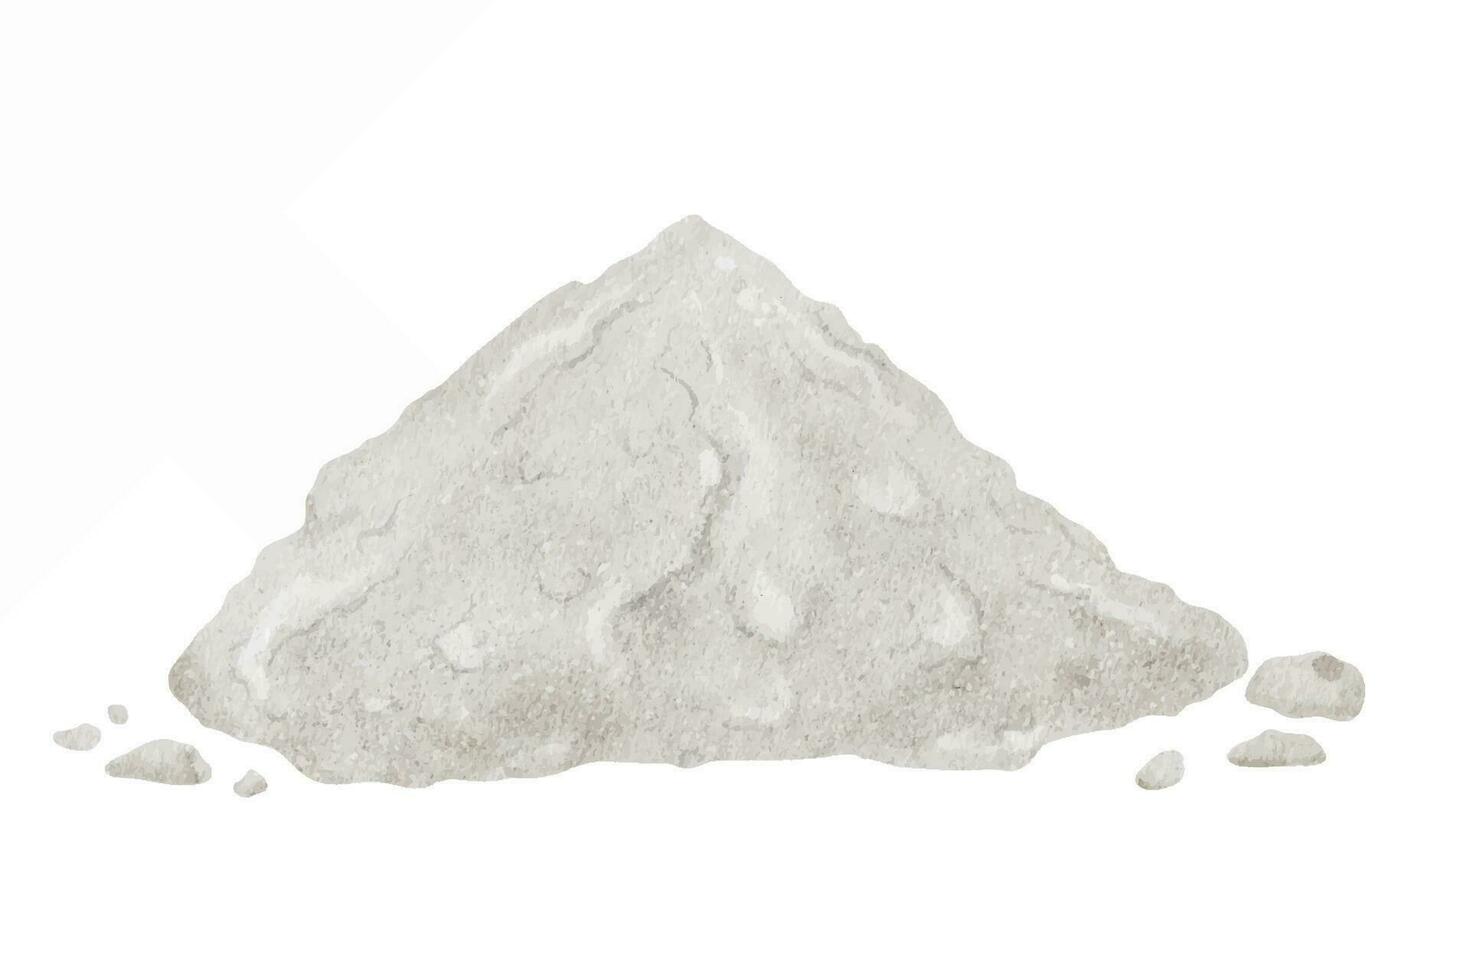 A mountain of flour. Spilled flour. Ingredients for making the dough. Bakery. Culinary clipart for food blogs, design of labels and packaging of goods, cards vector